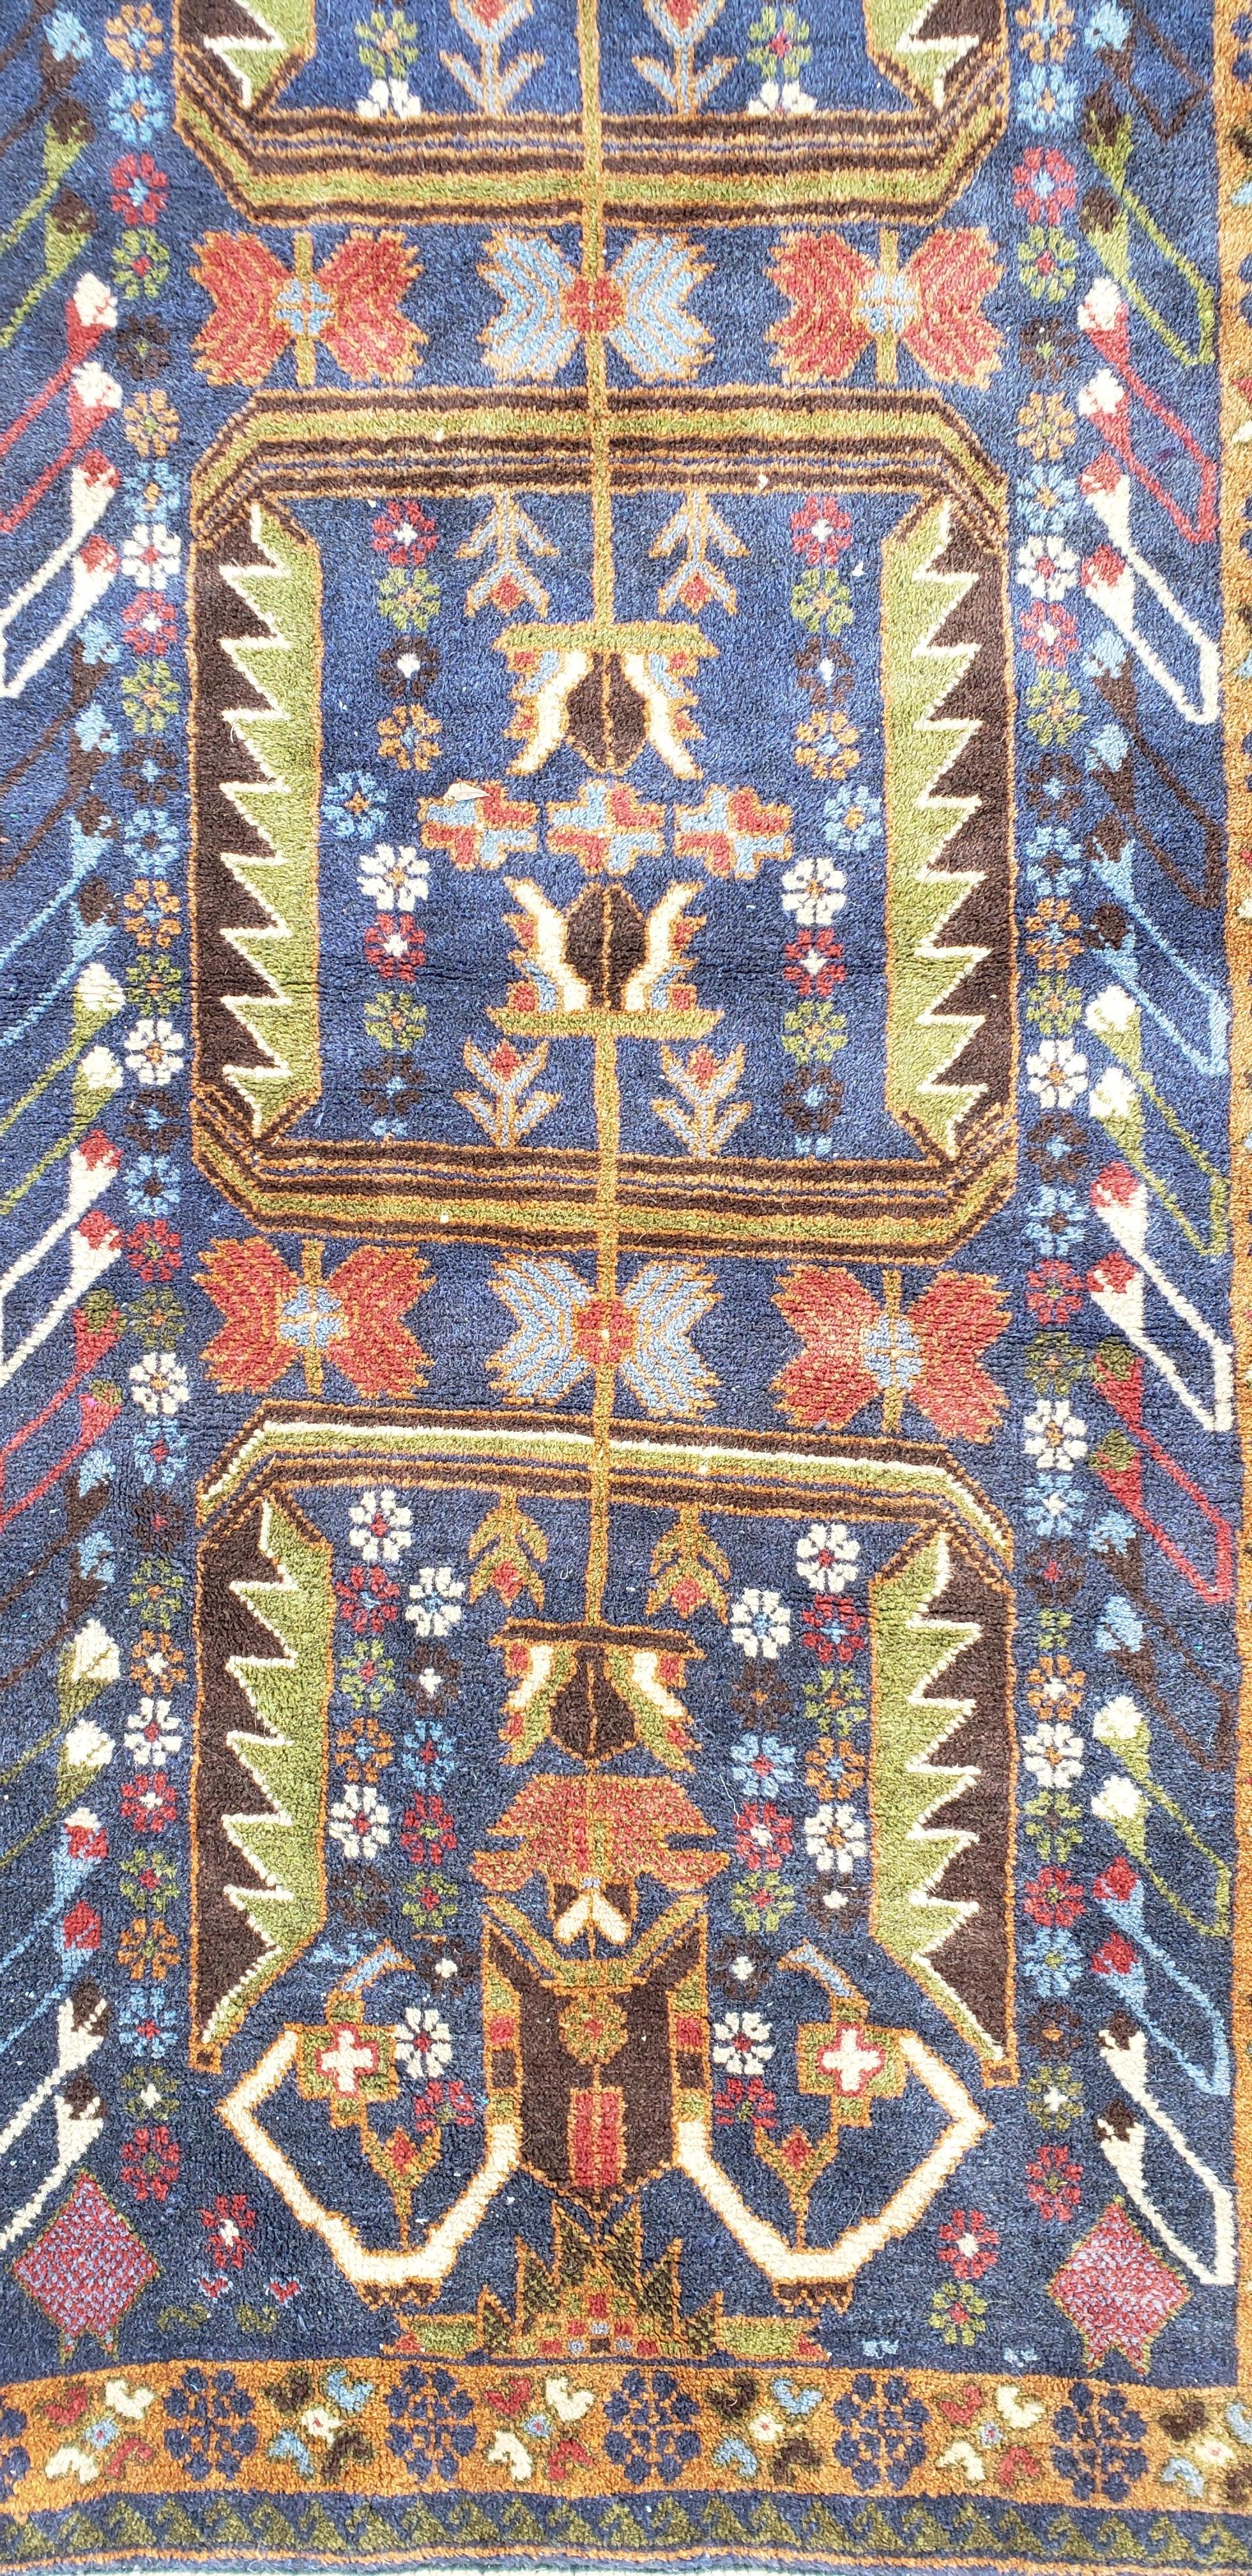 We carry some of the best Afghan rugs around, and if you like to give your hallway a colorful new look with one of our runners, we are here to help. This one measures approximately 114